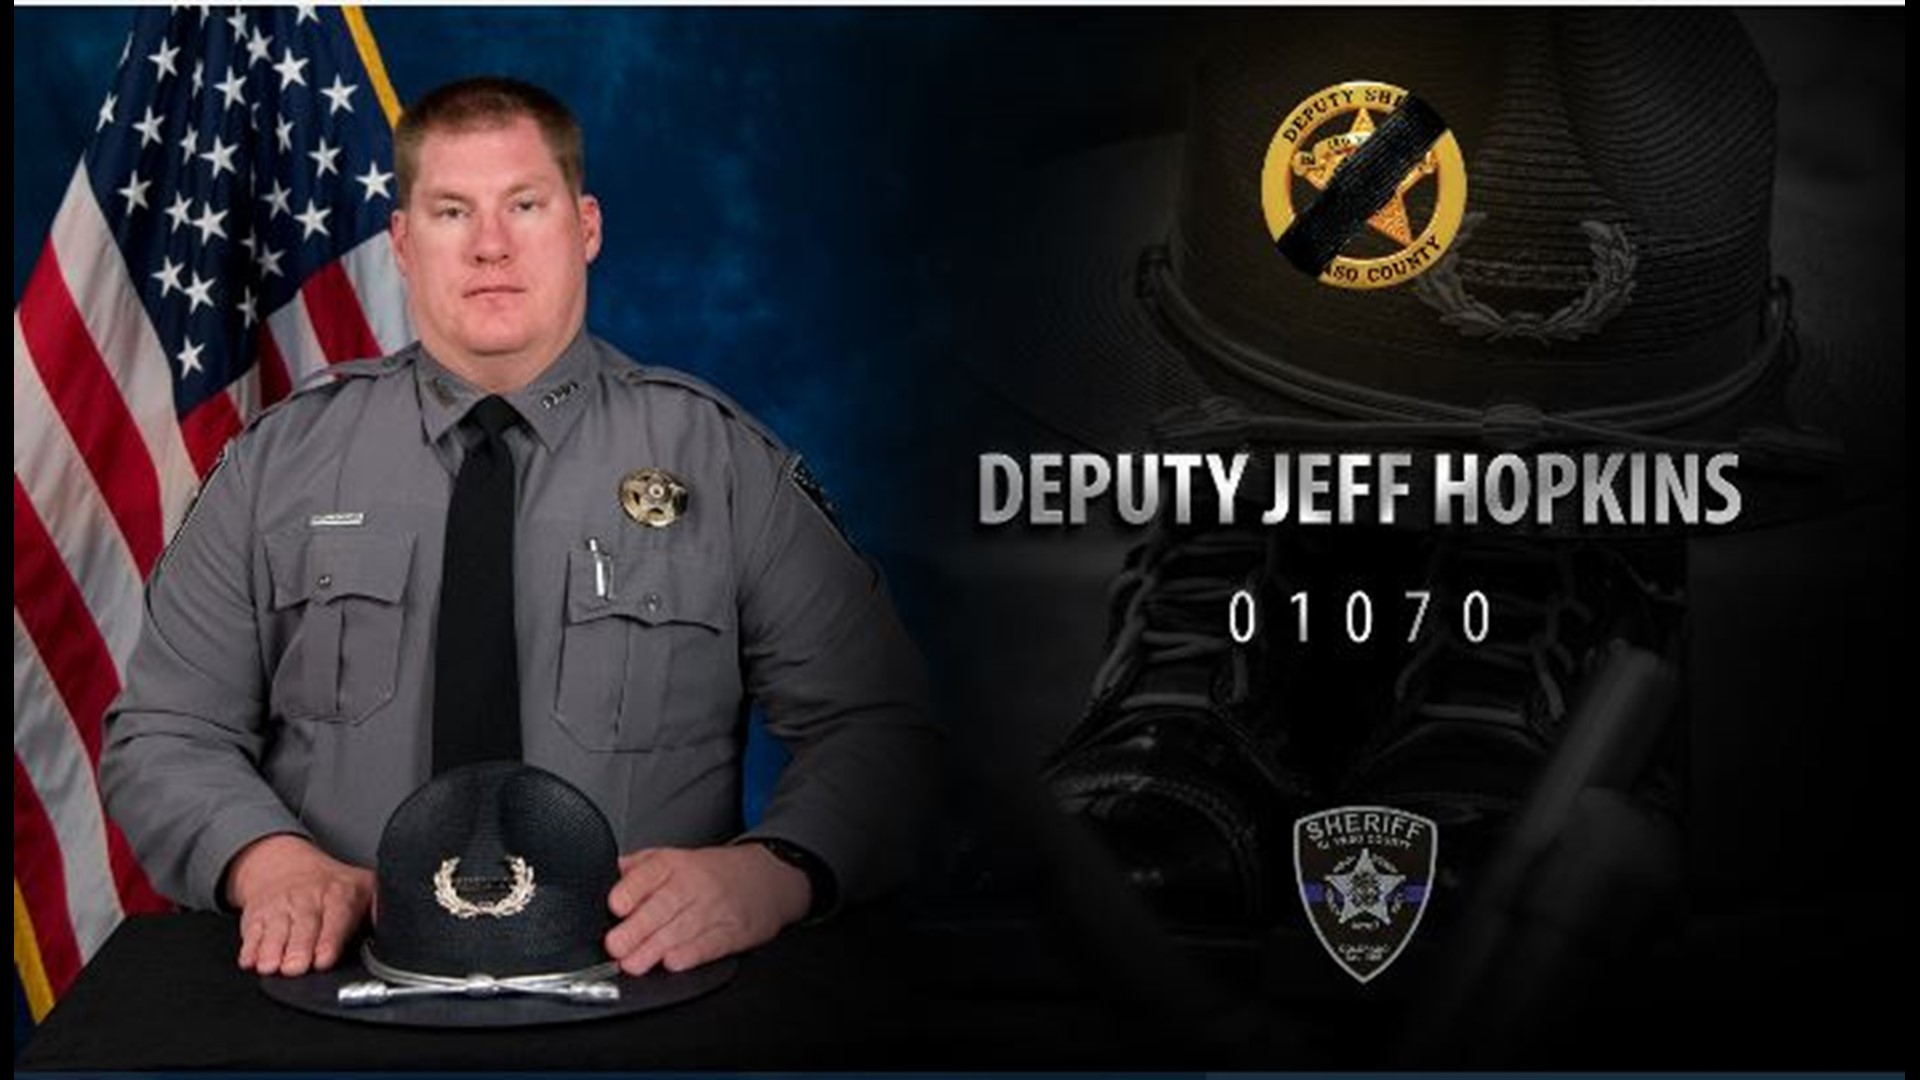 Deputy Jeff Hopkins, 41, died Wednesday after testing positive for COVID-19. It's unknown how he contracted the novel coronavirus.